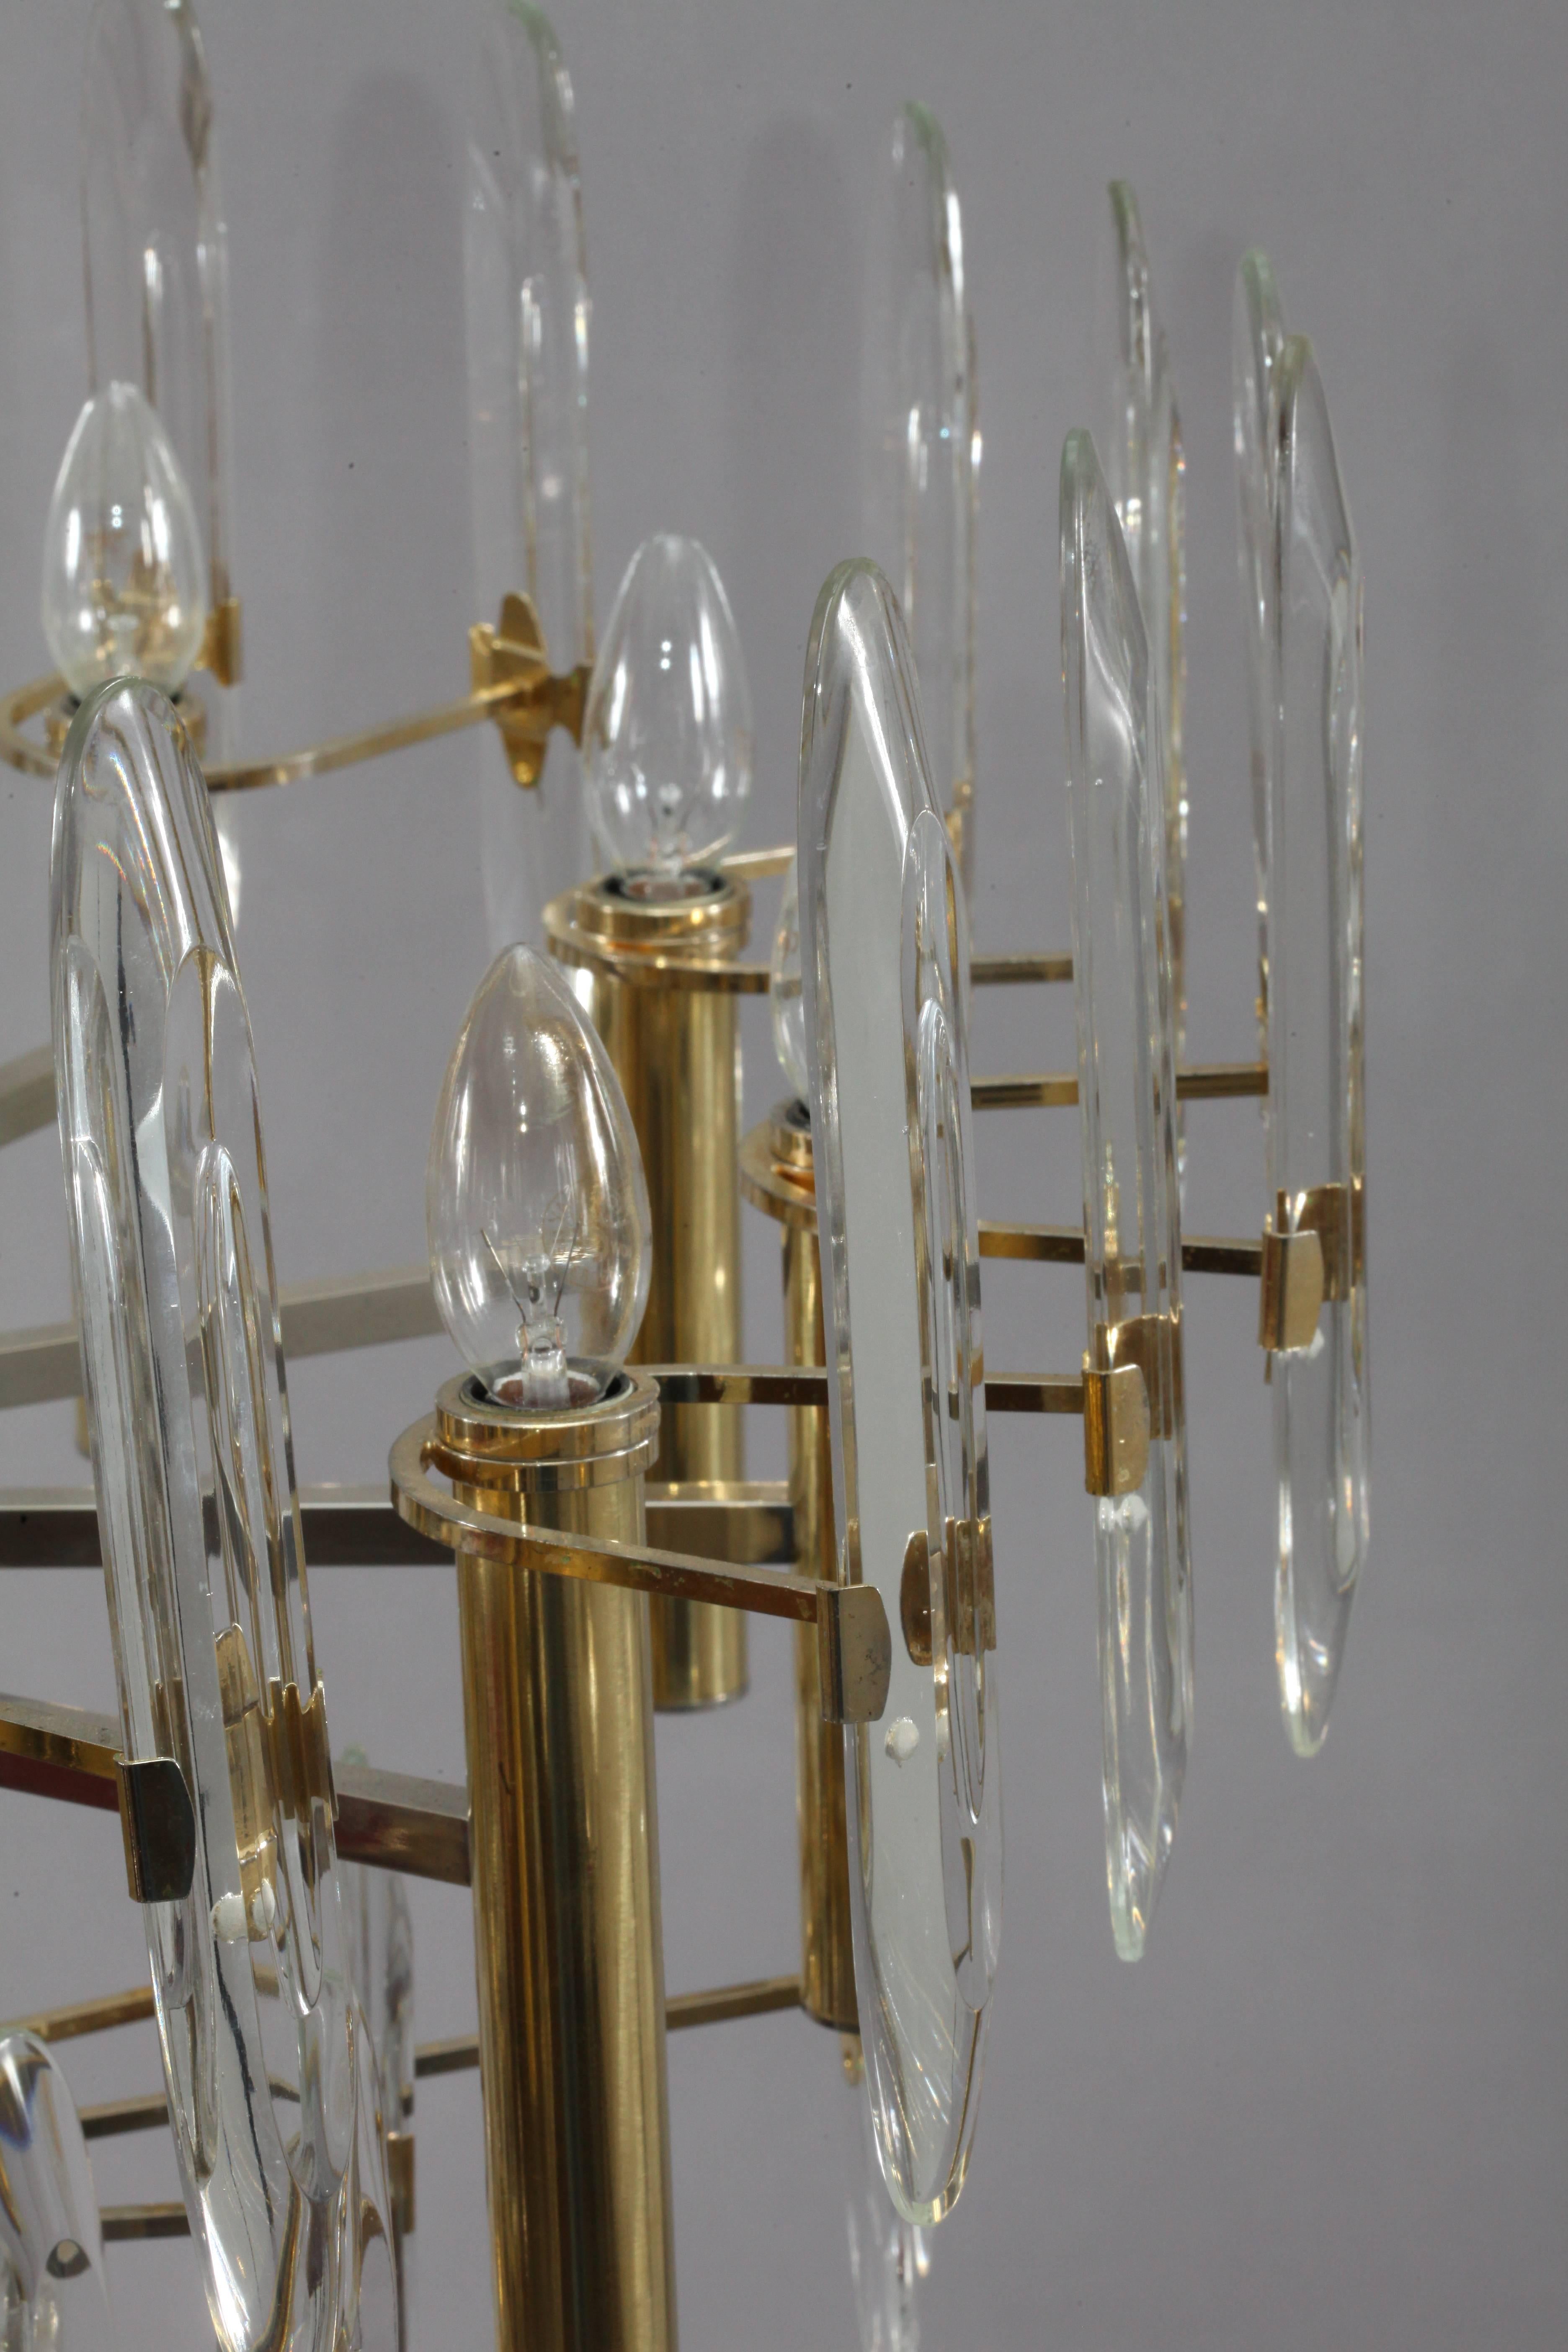 ceiling lamp,
Gaetano Sciolari,
Italy 1960.
18 bulb sockets, glass, brass
The length of the stem can be altered to any size for free